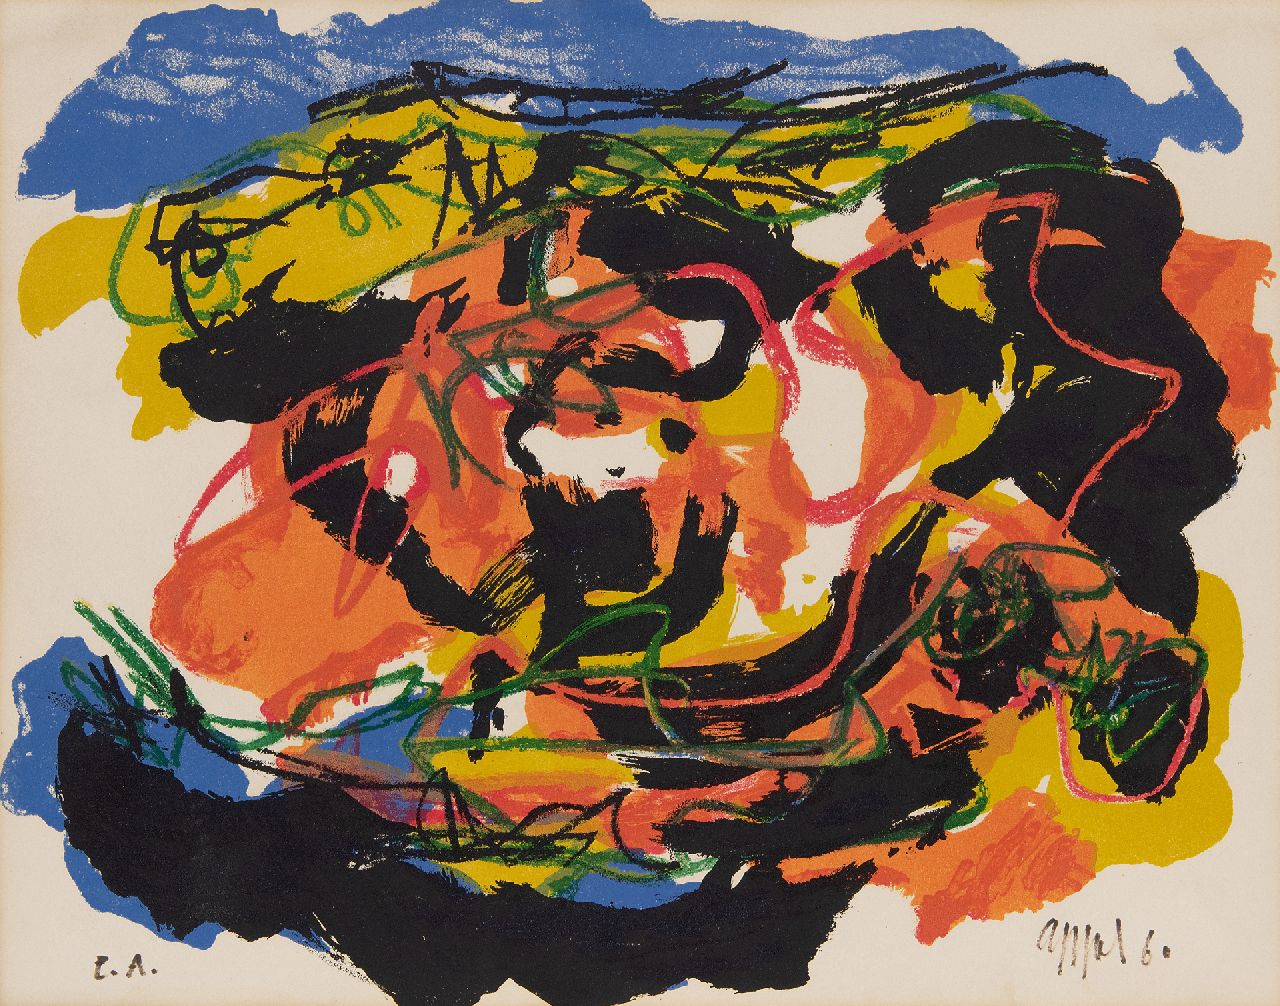 Appel C.K.  | Christiaan 'Karel' Appel | Prints and Multiples offered for sale | Composition, lithograph 38.9 x 49.8 cm, signed l.r. and dated '60